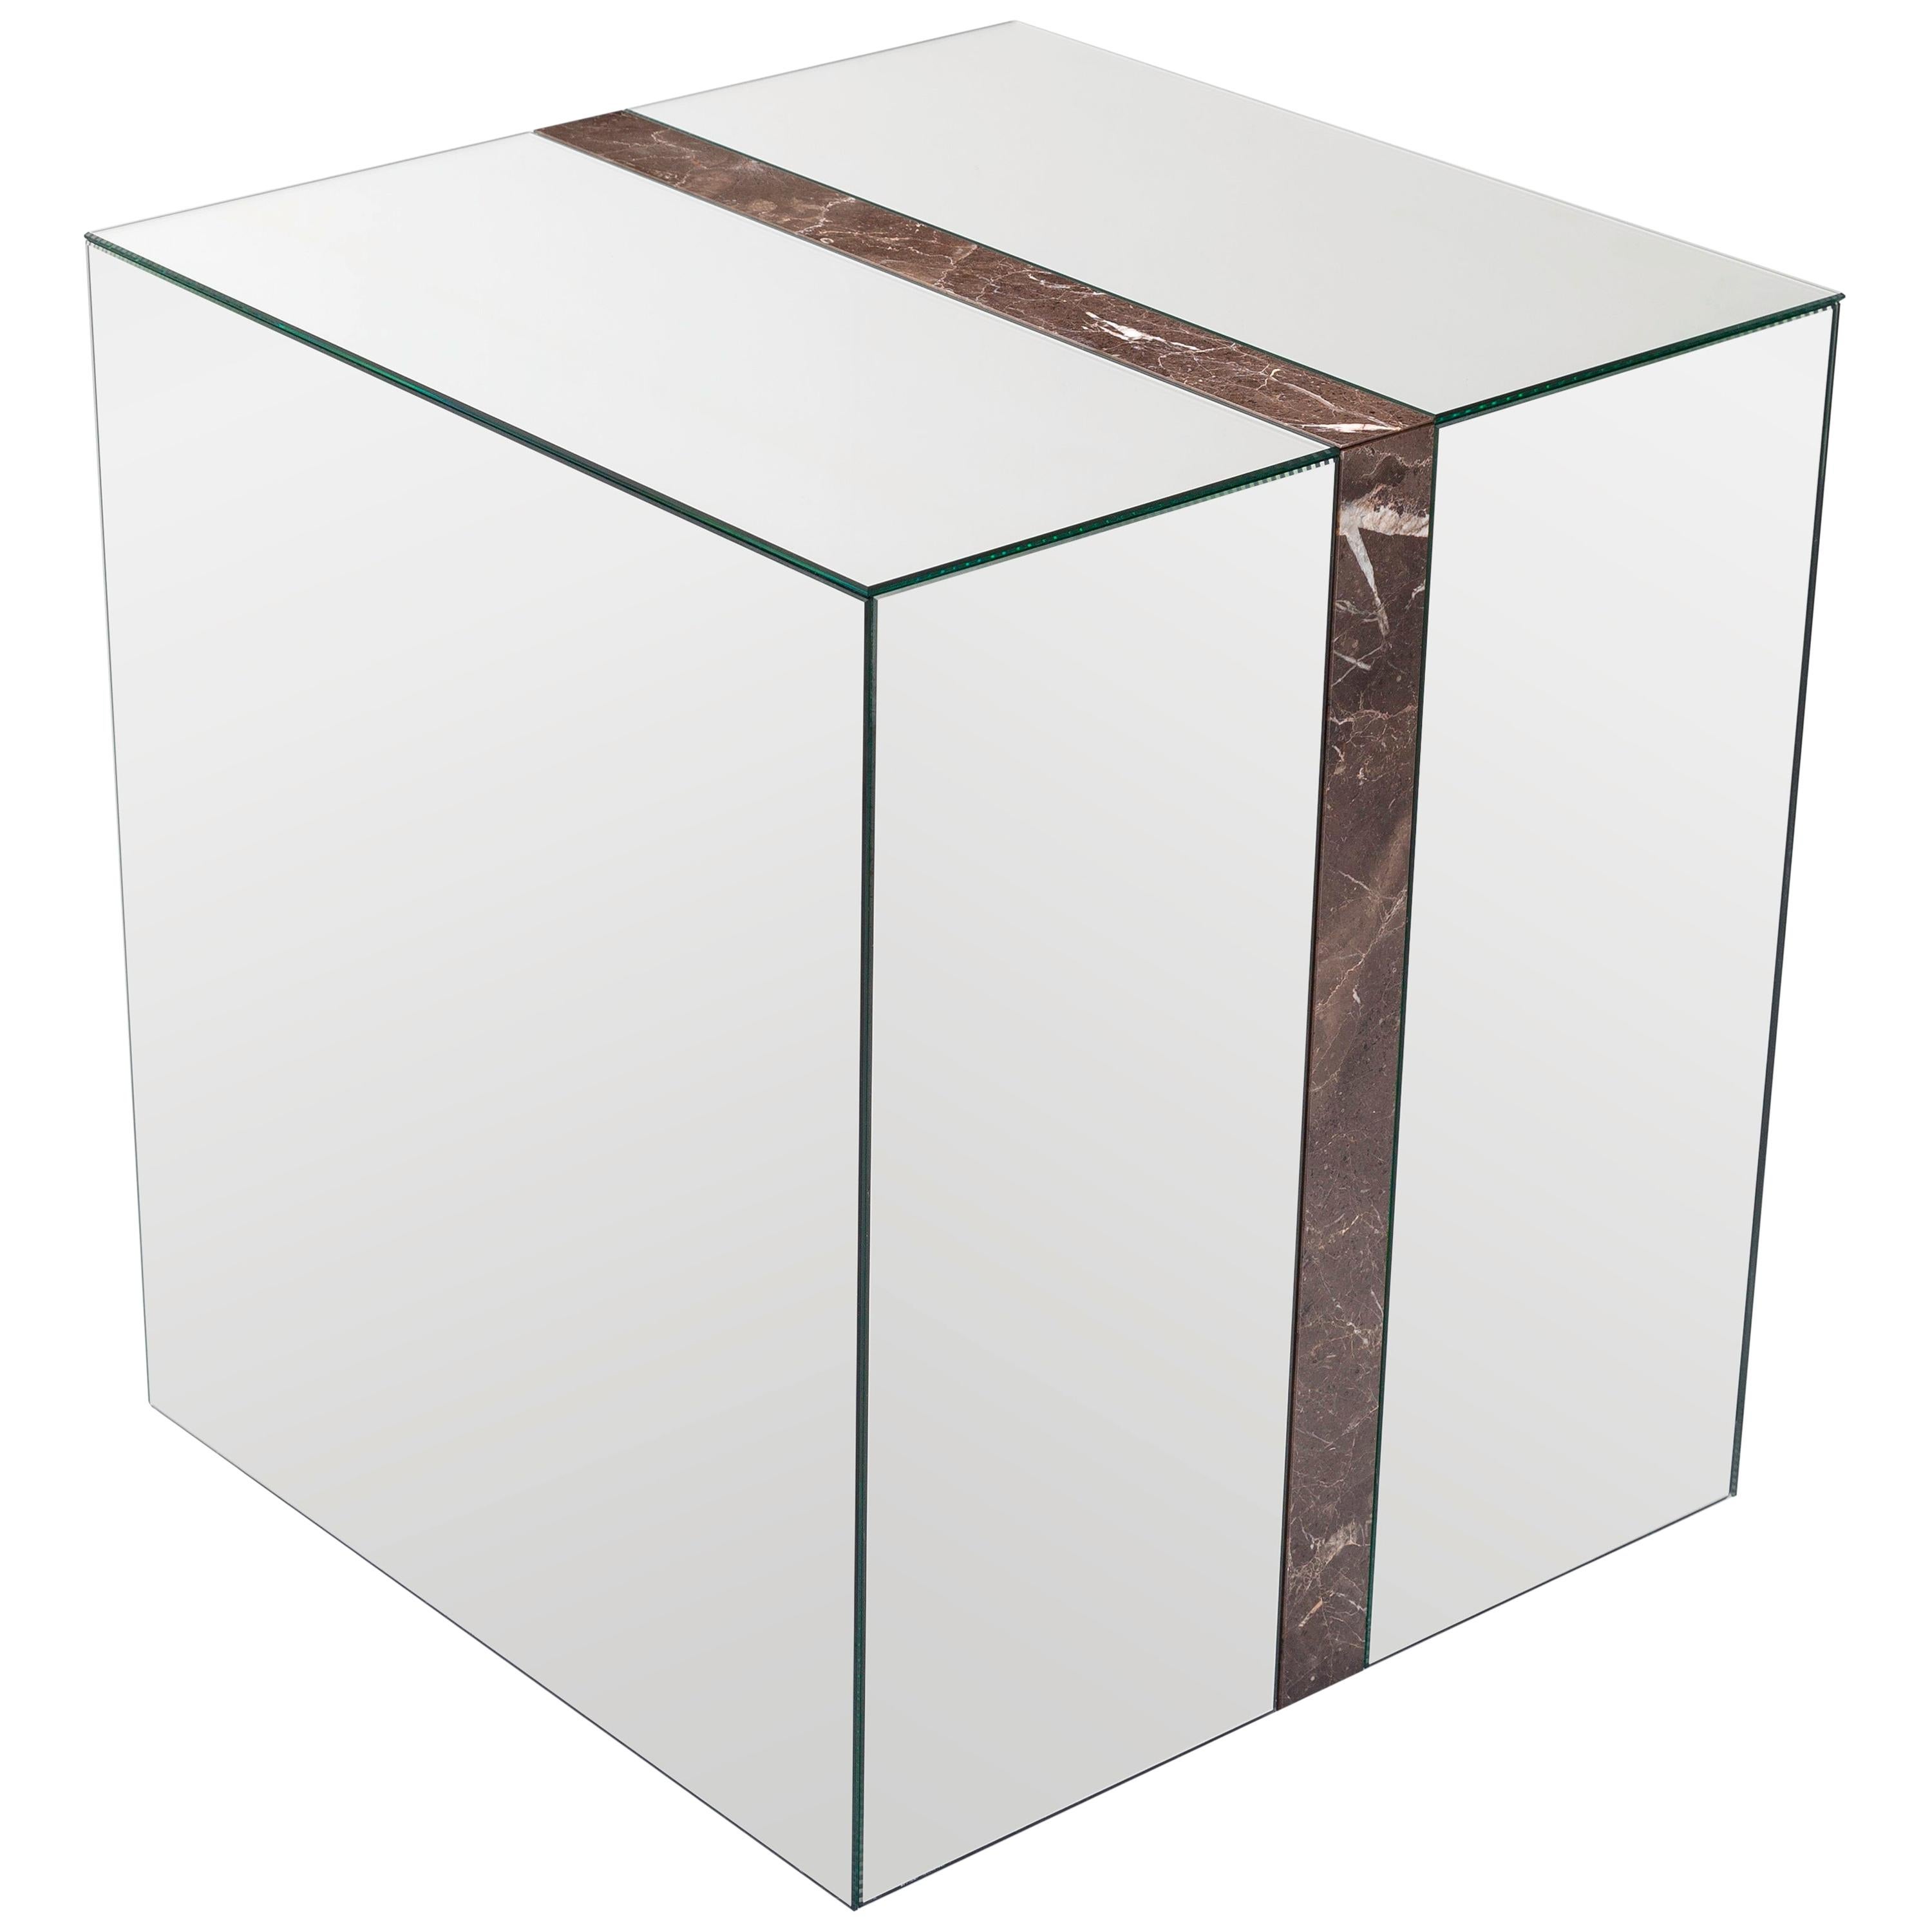 LEGADO side table with mirrored structure and marble border